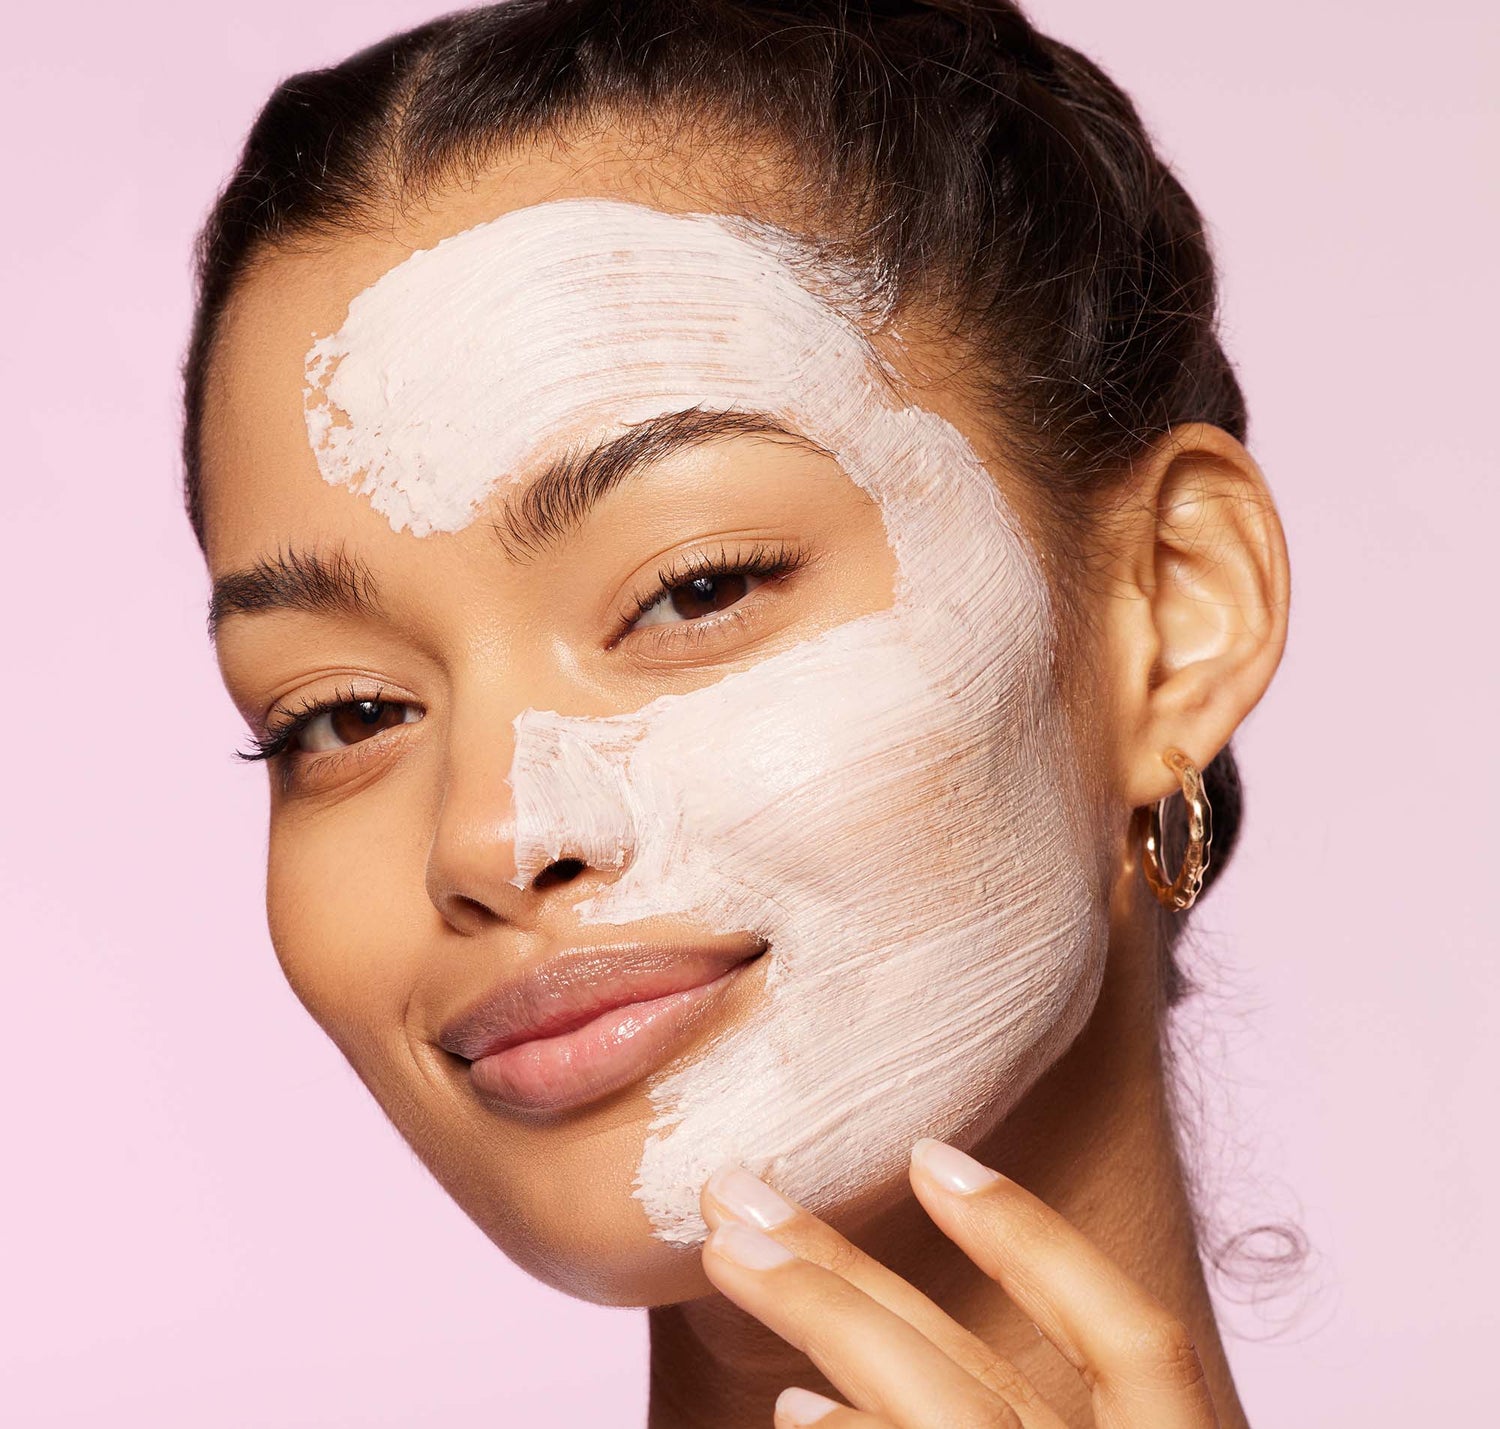 Breakouts and blemishes clay mask on skin